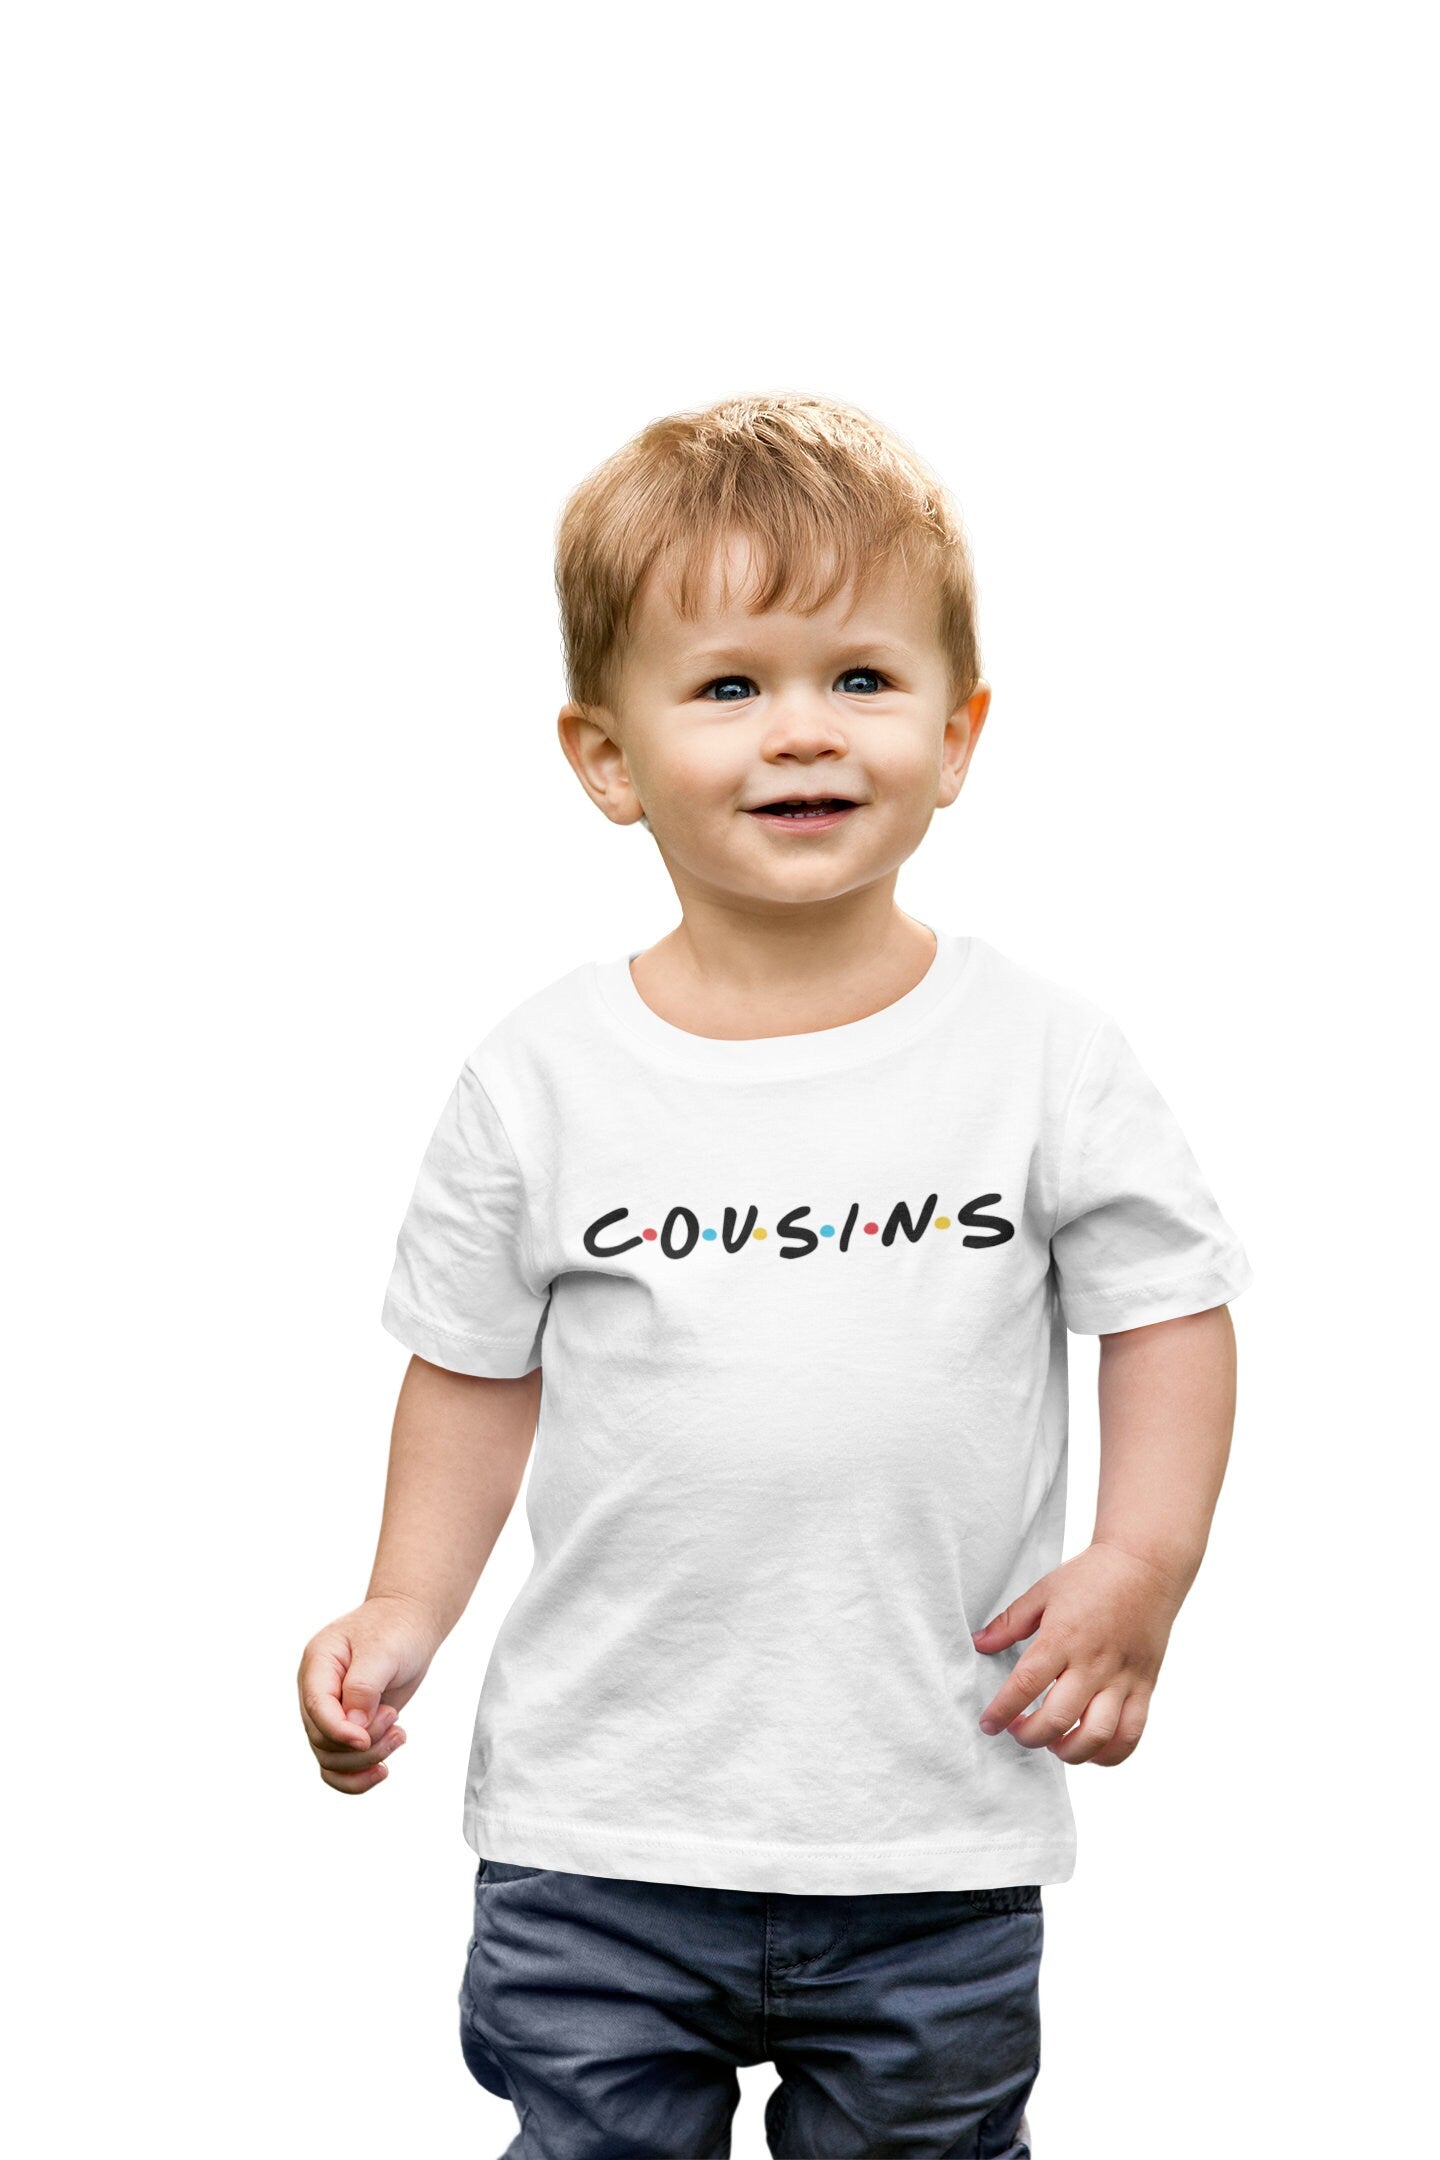 Friends Cousins T-Shirt, Matching Sibling Outfit